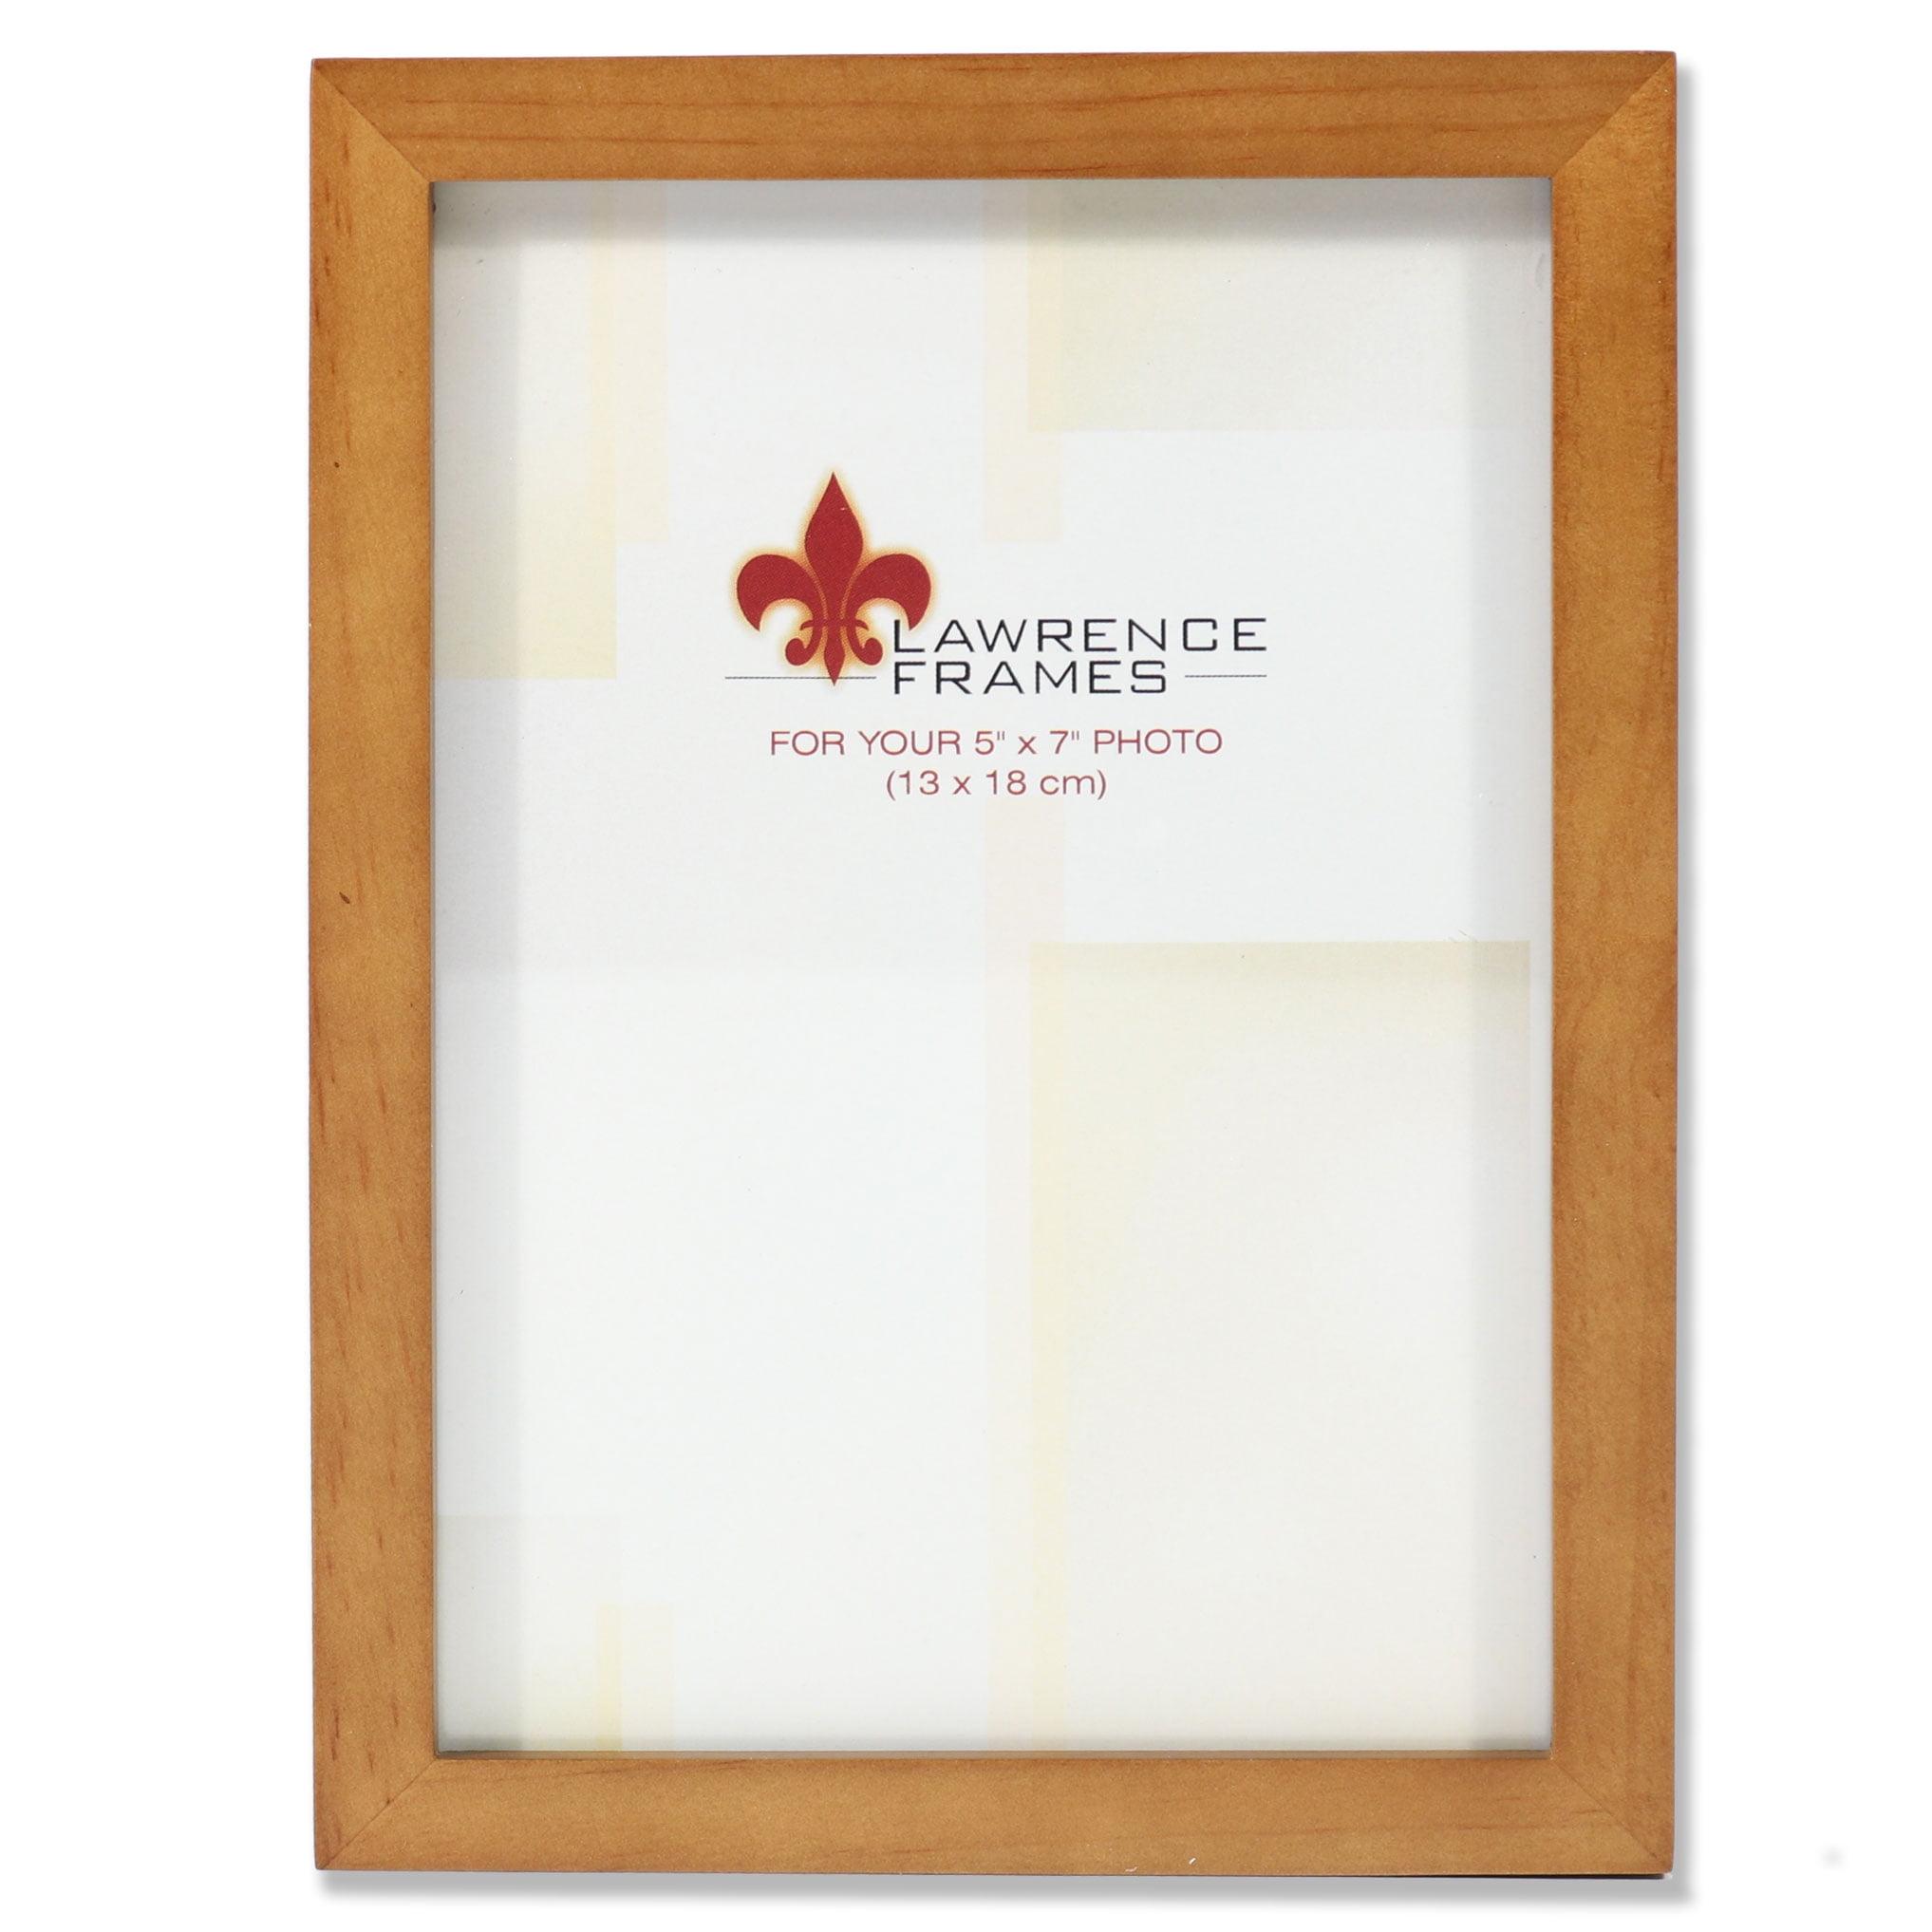 Nutmeg Wood 5x7 Rectangular Picture Frame with Beige Accents